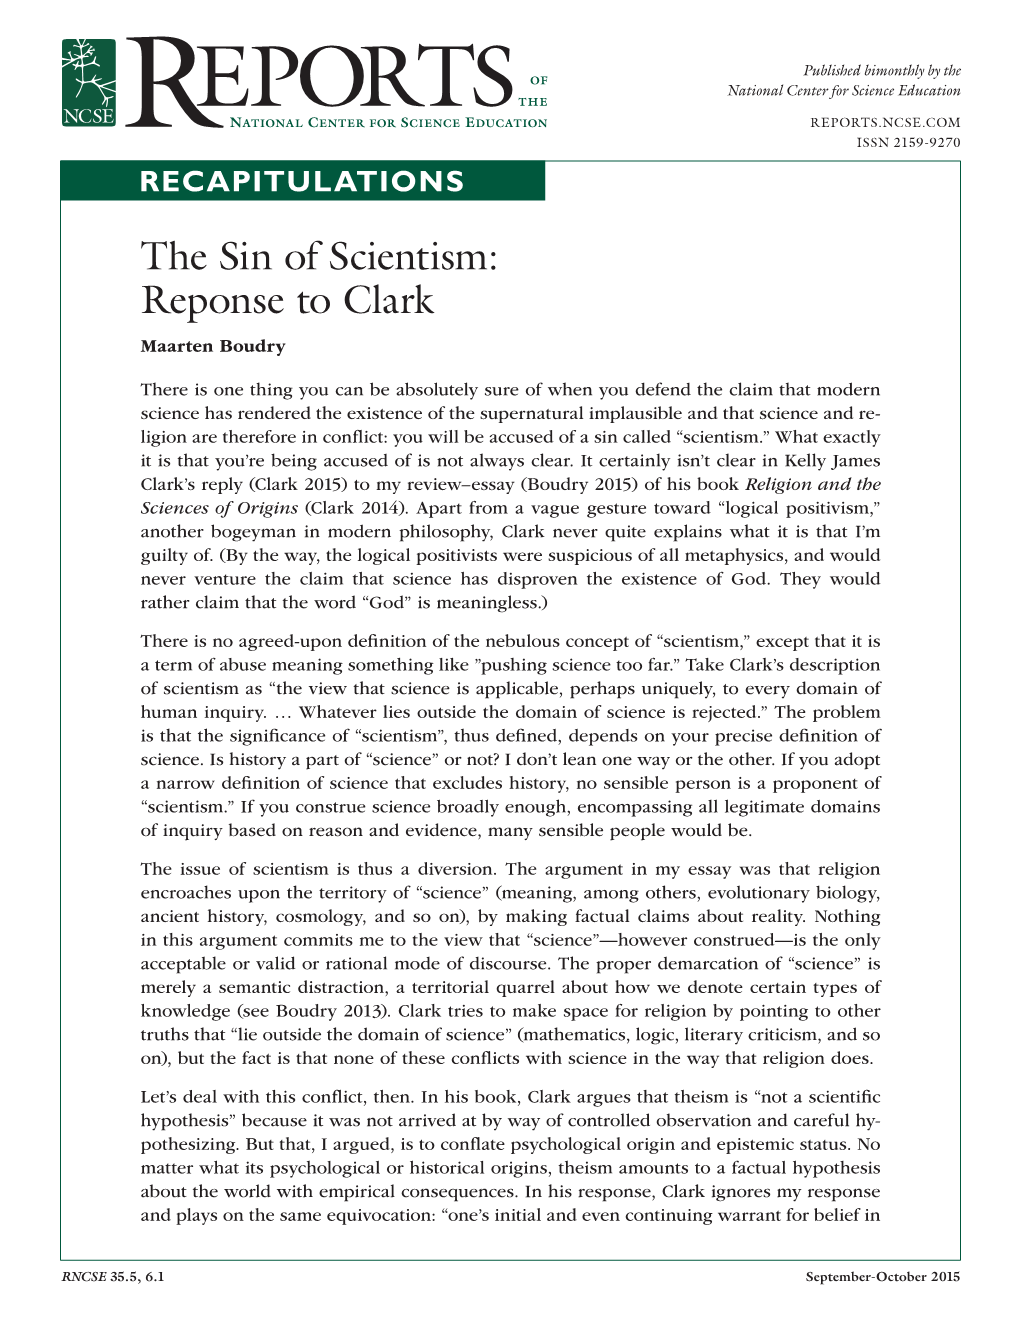 Reports.Ncse.Com R ISSN 2159-9270 RECAPITULATIONS the Sin of Scientism: Reponse to Clark Maarten Boudry